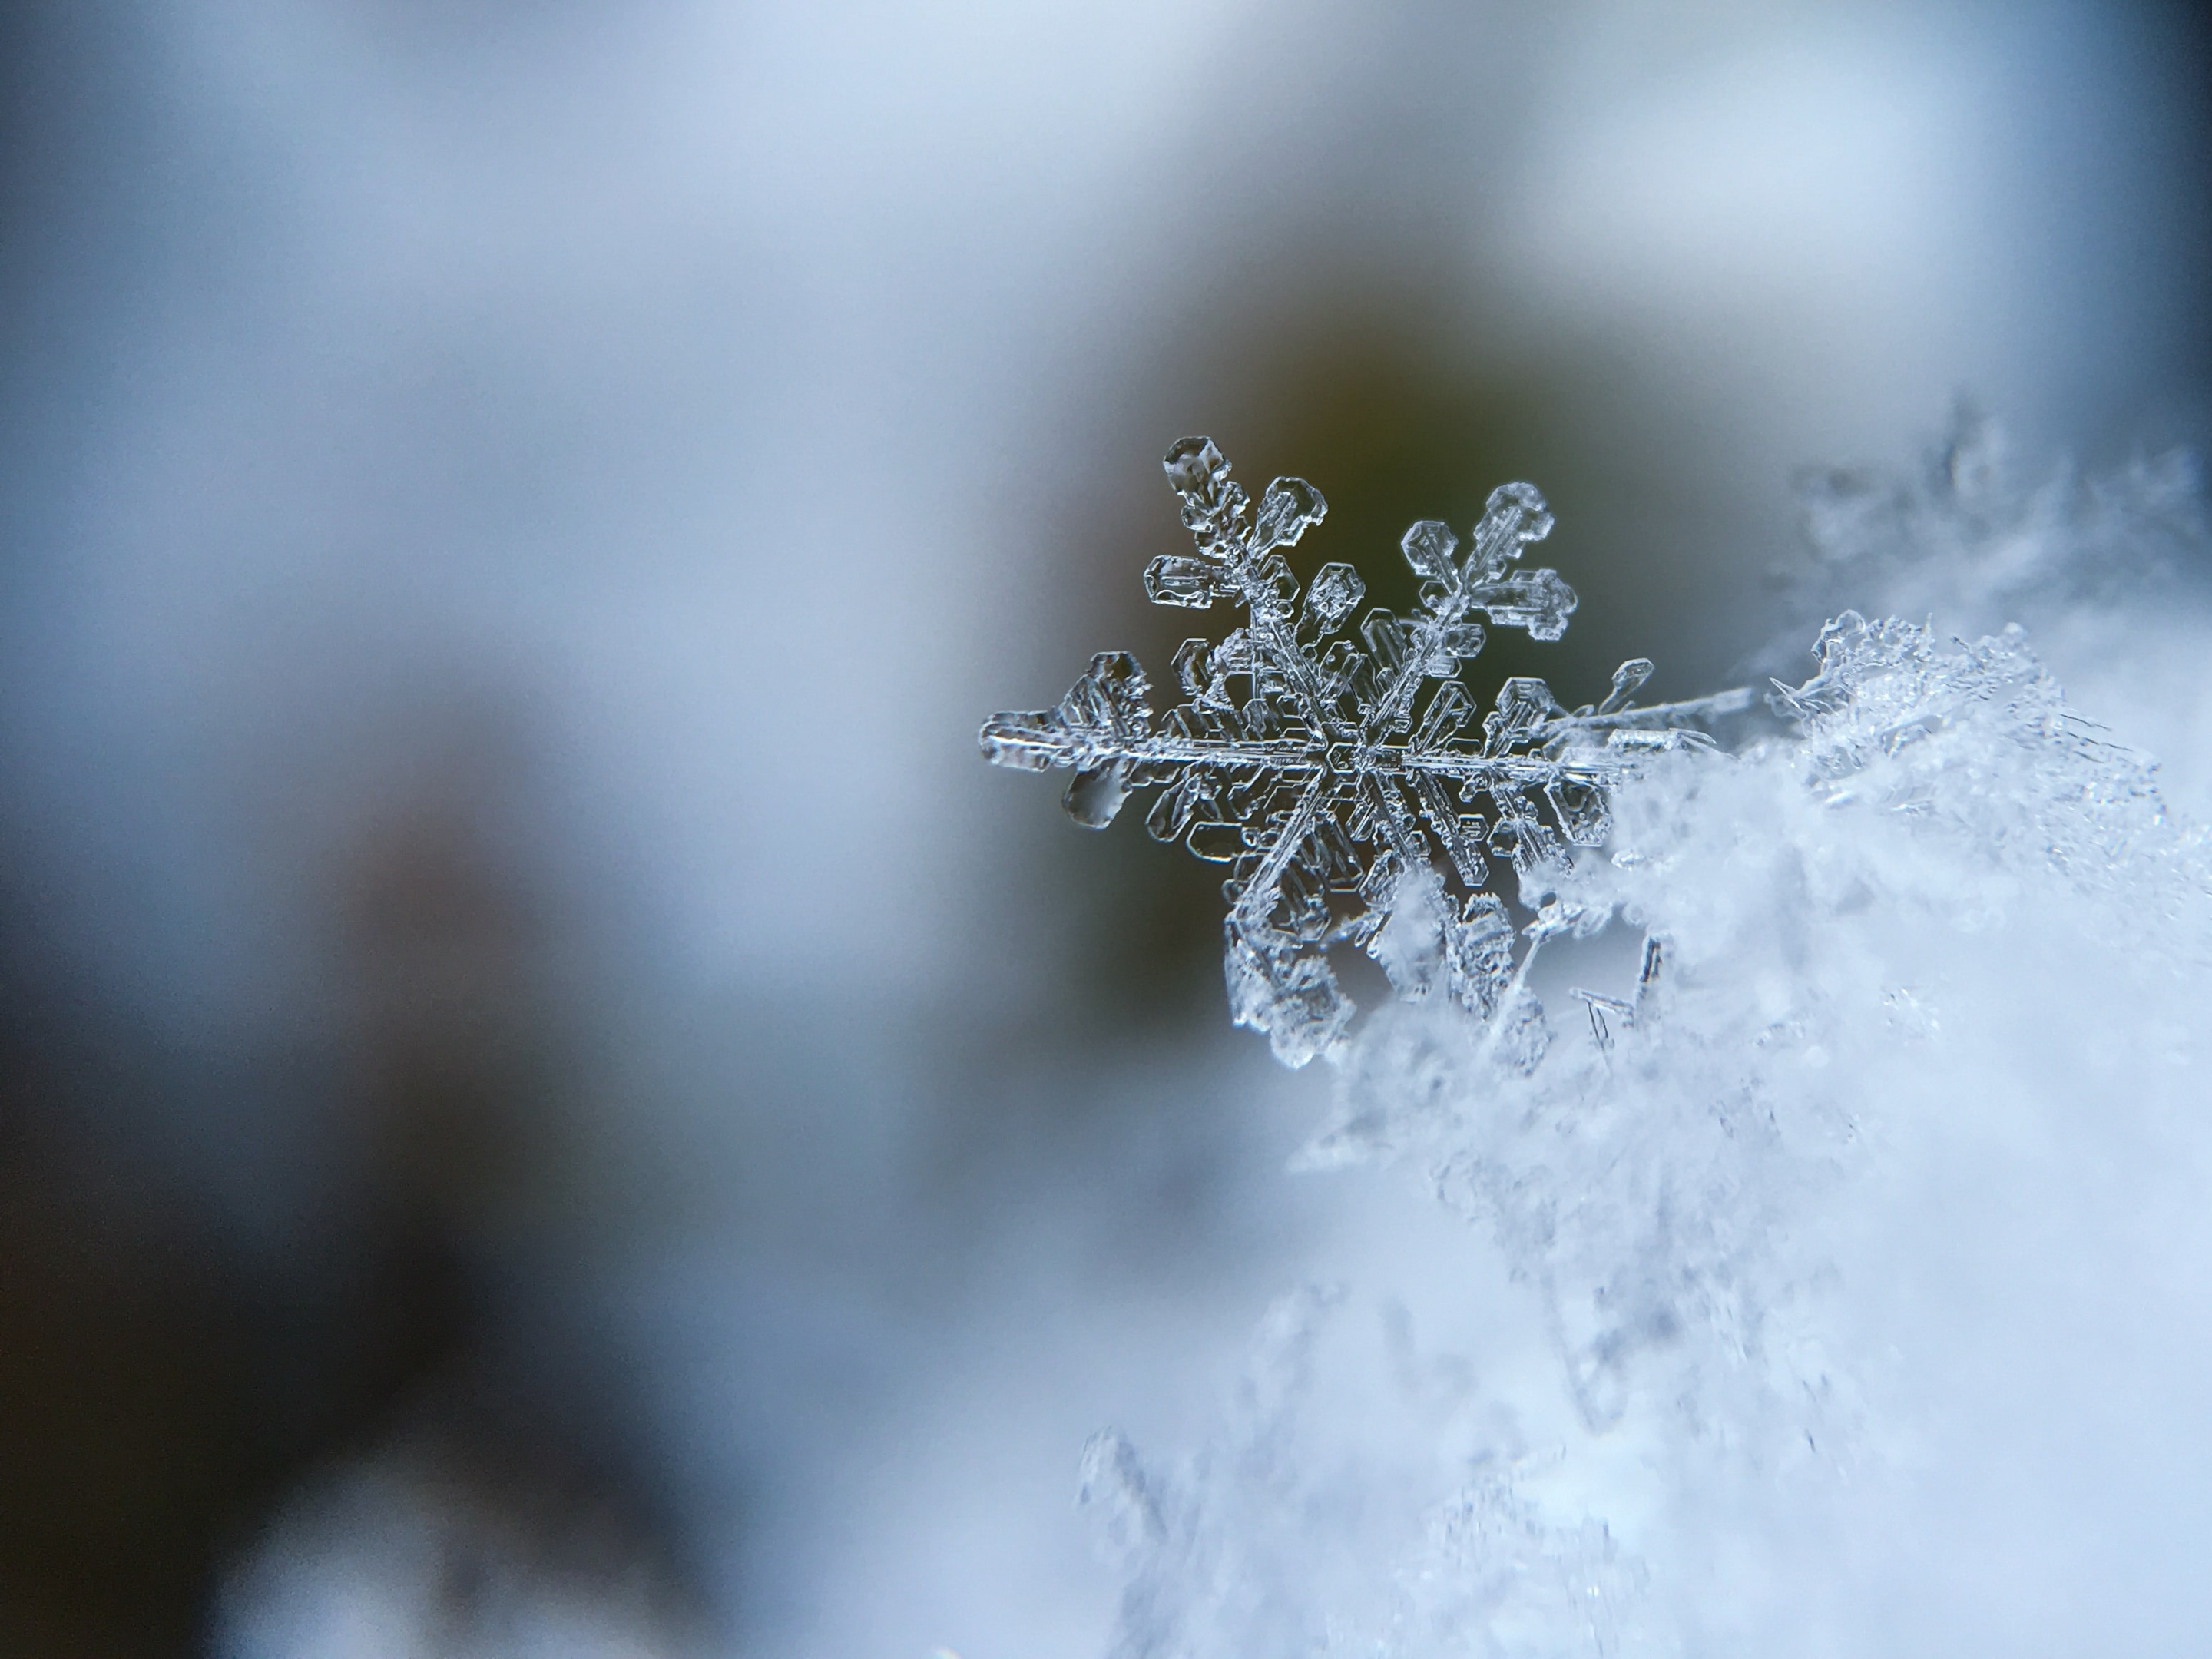 A close up photo of a snow flake.